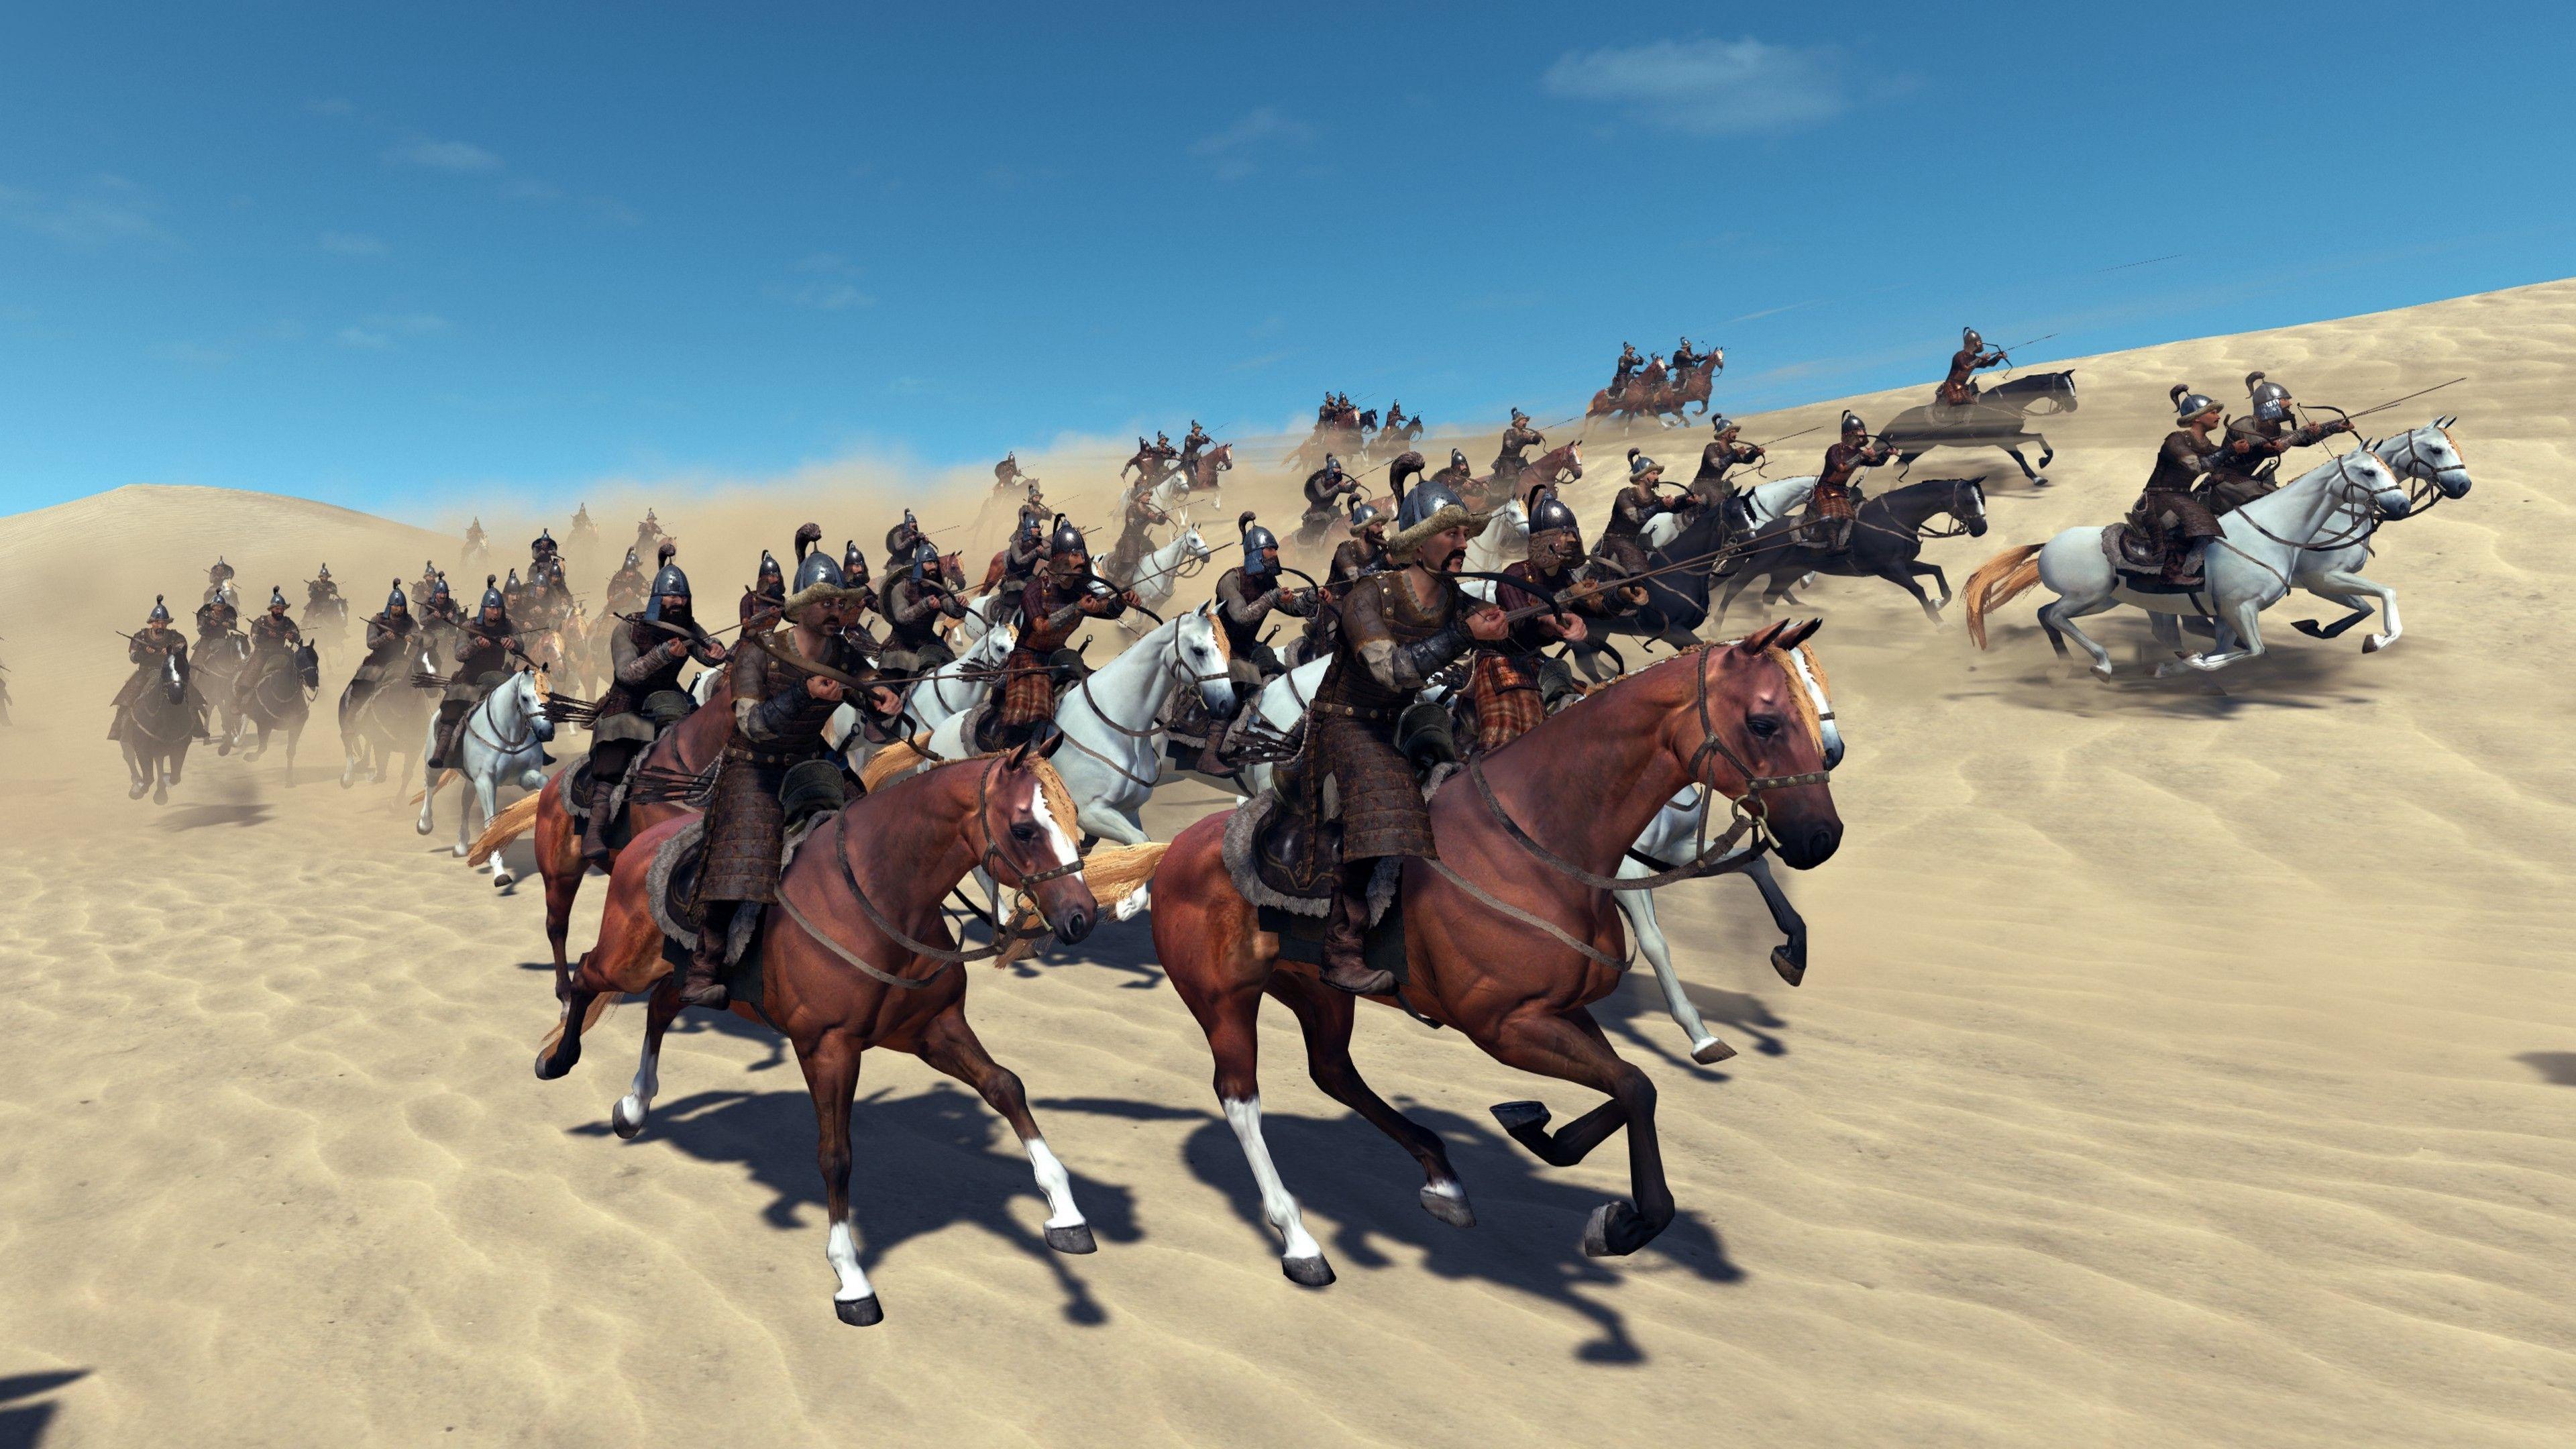 Mount and blade bannerlord караваны. Mount and Blade 2. Mount and Blade 2 Bannerlord. Маунтин блейд 2020. Mounted Blade 2 Bannerlord.